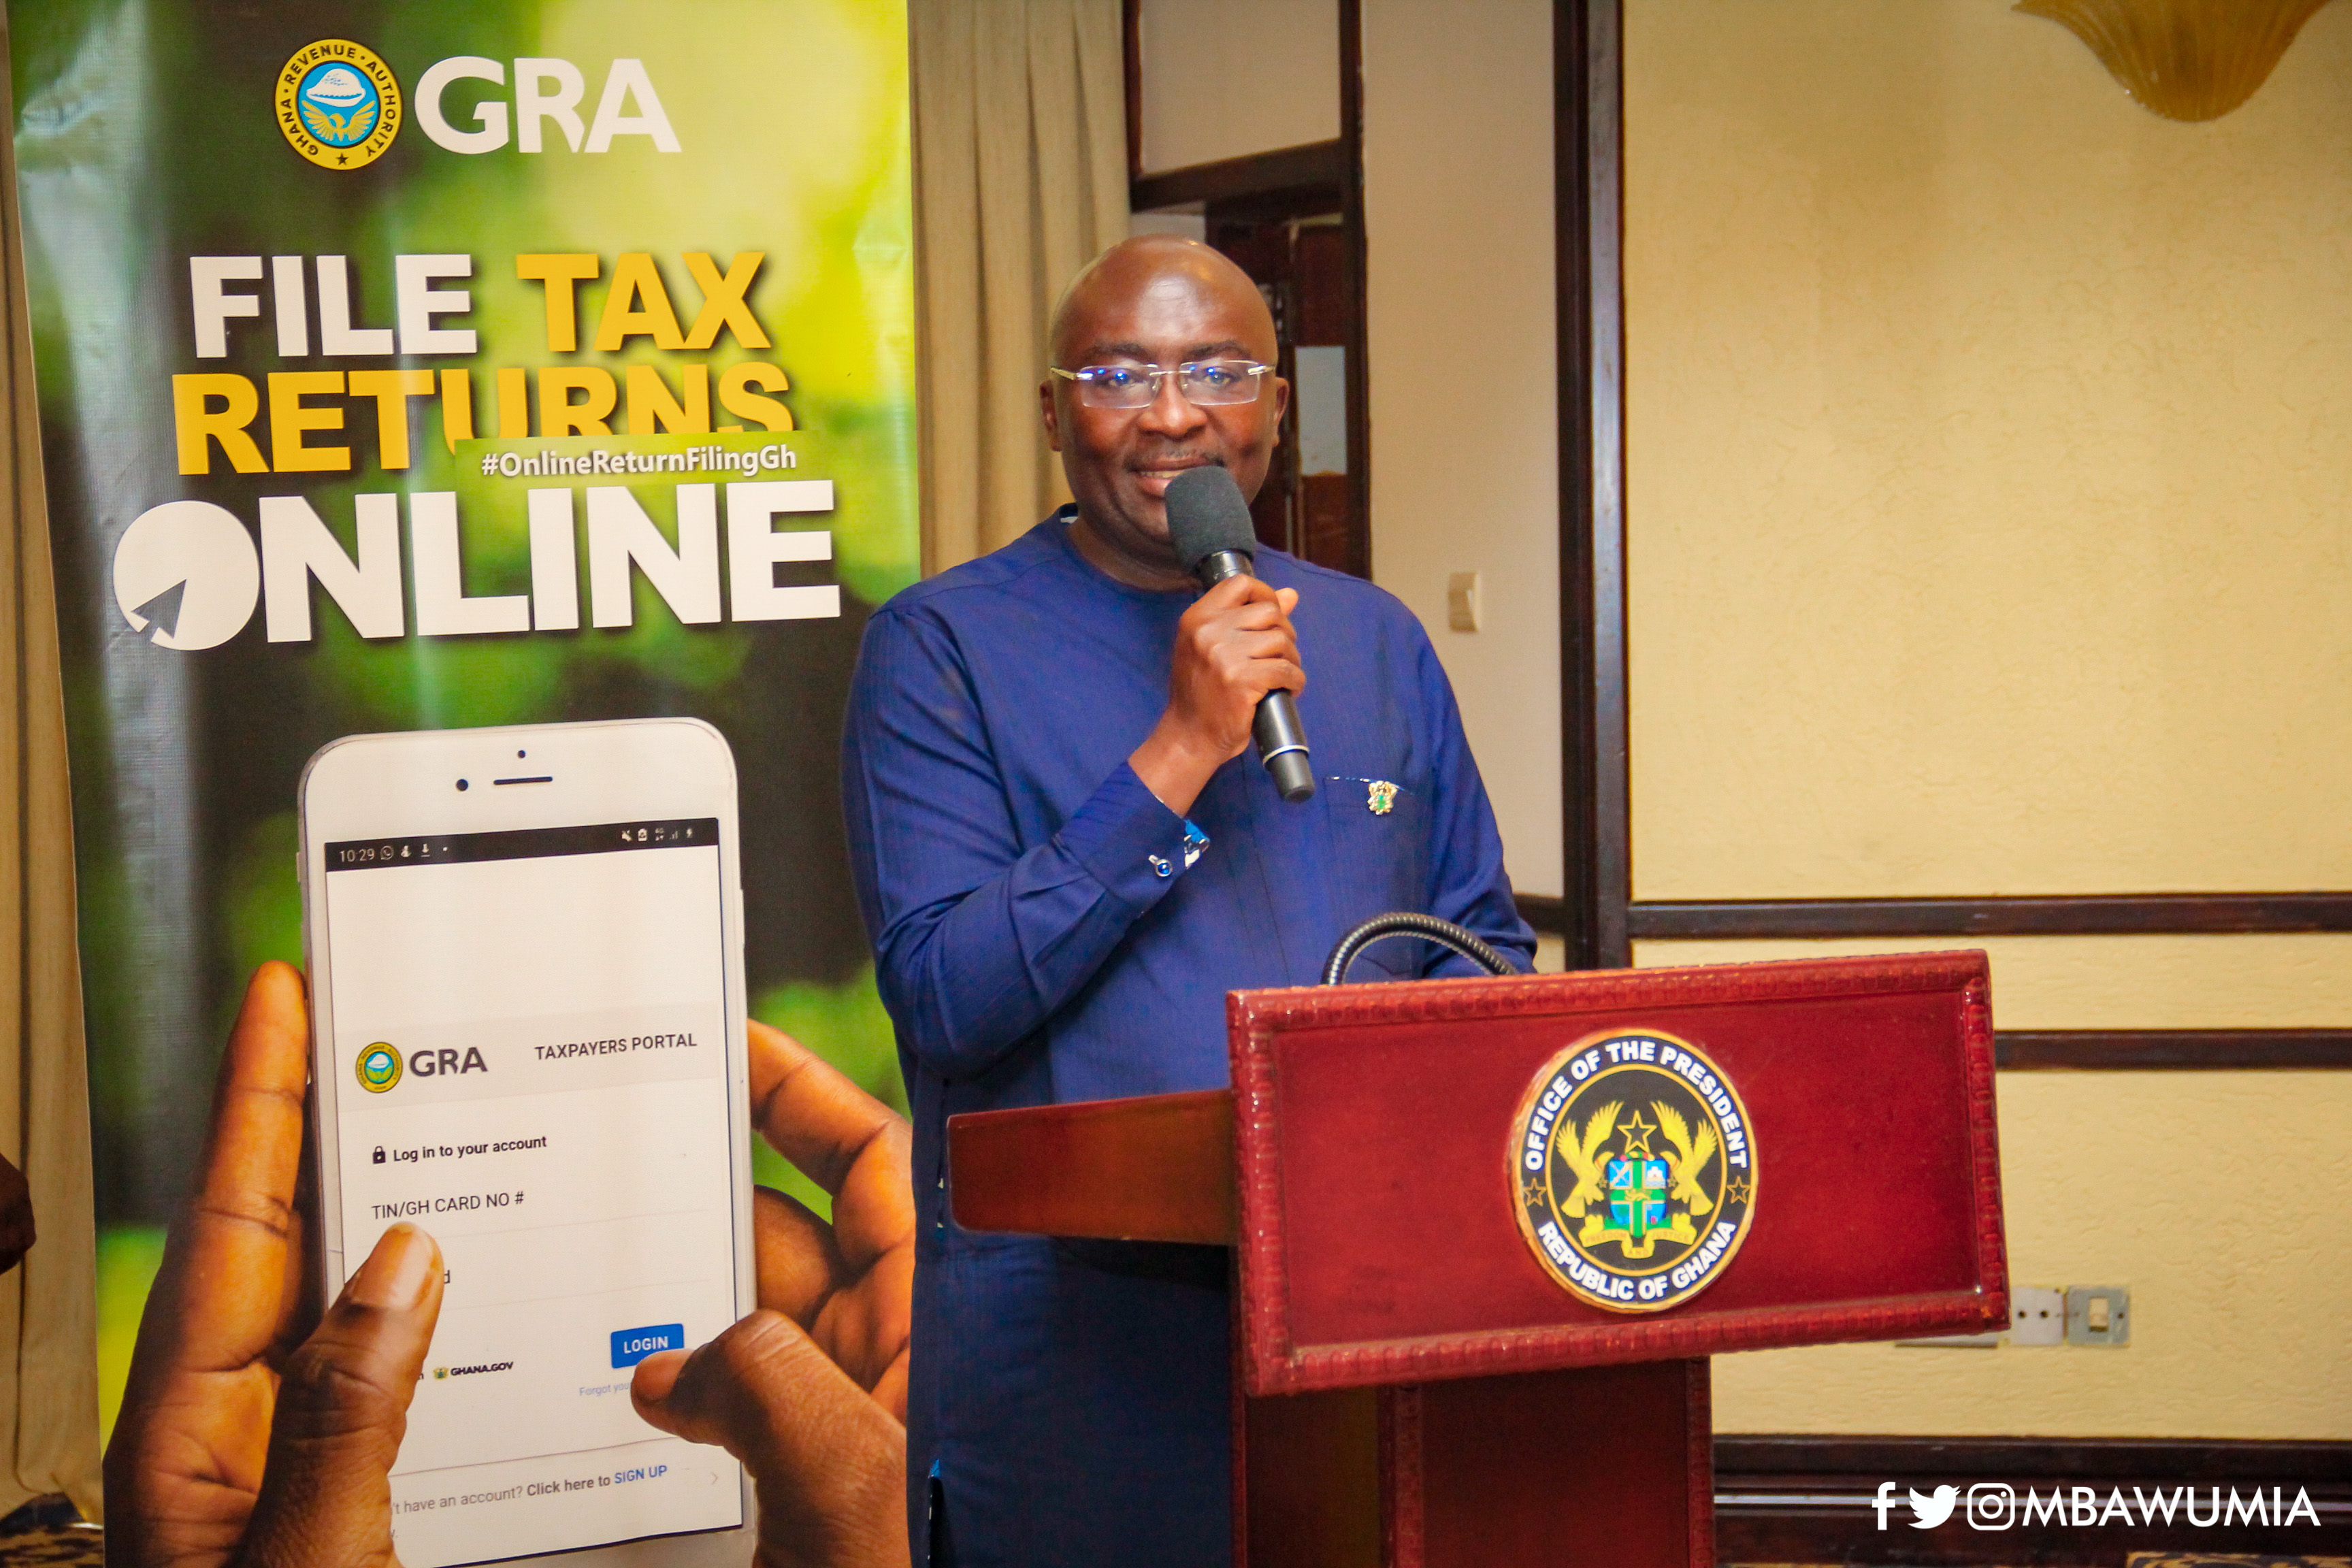 Bawumia launches digital Electronic Tax Clearance Certificate for GRA